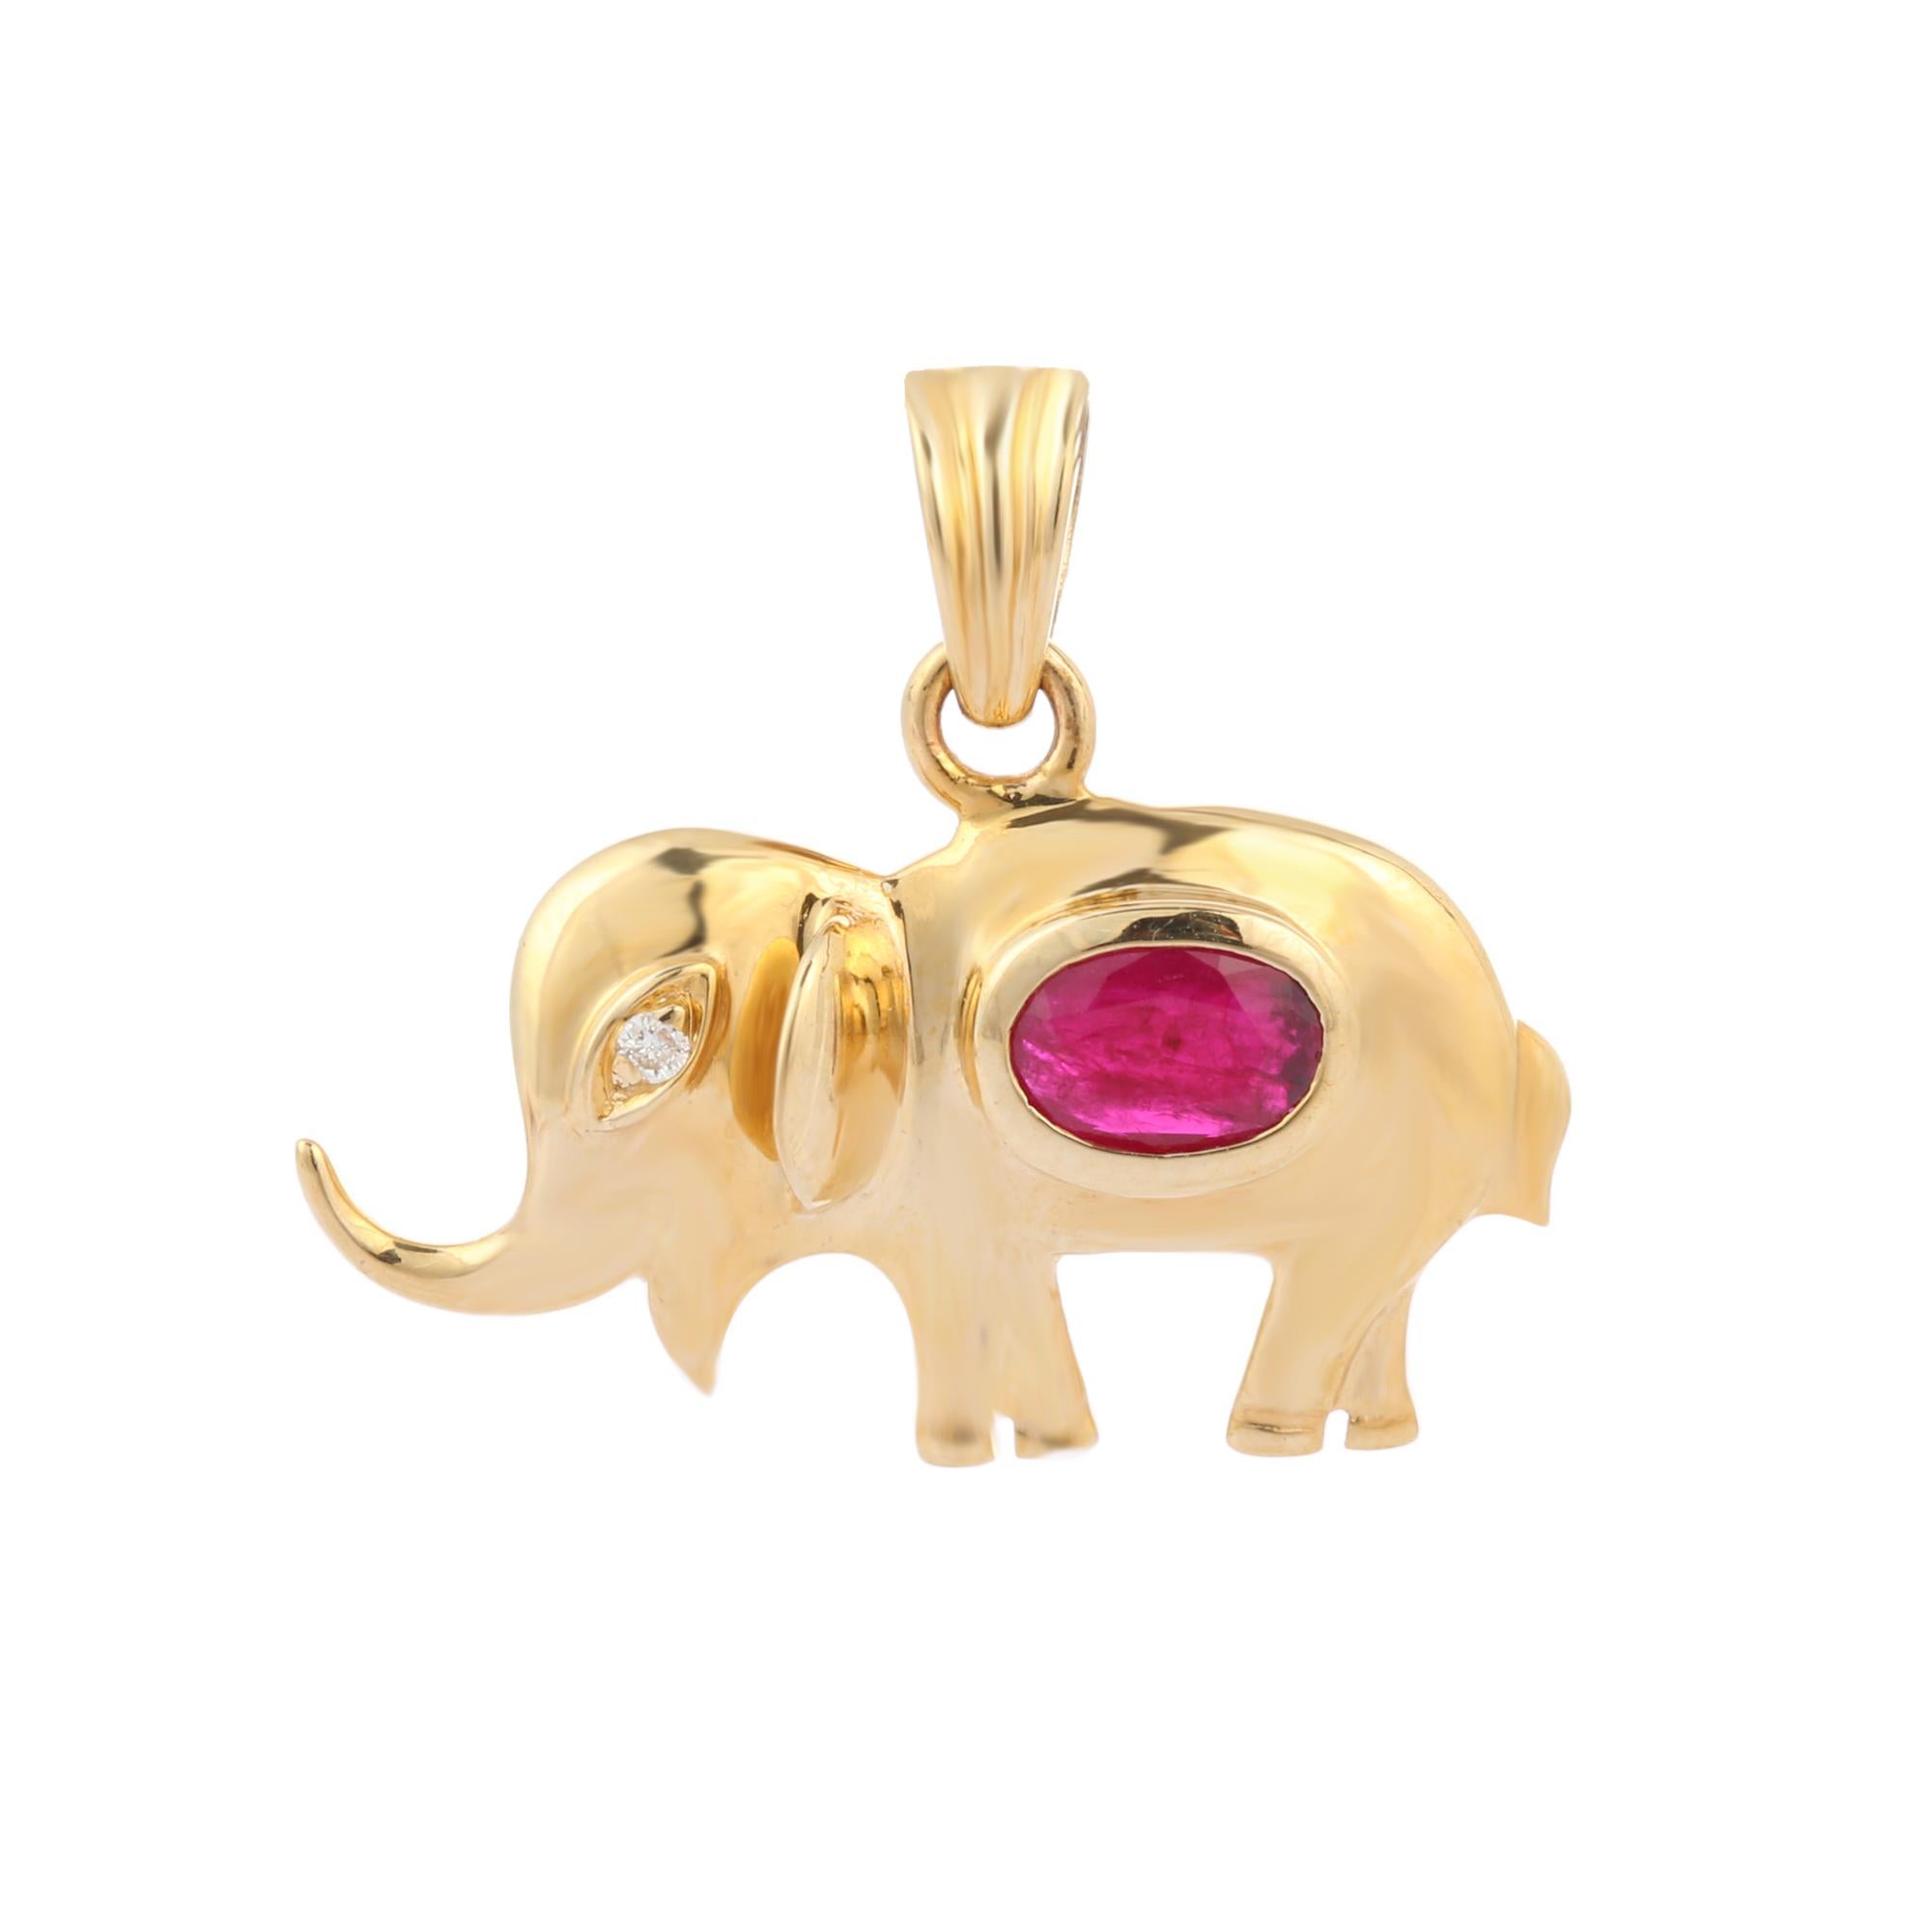 Natural ruby and diamond elephant animal pendant in 14K Gold. It has a oval cut ruby with diamonds that completes your look with a decent touch. Pendants are used to wear or gifted to represent love and promises. It's an attractive jewelry piece